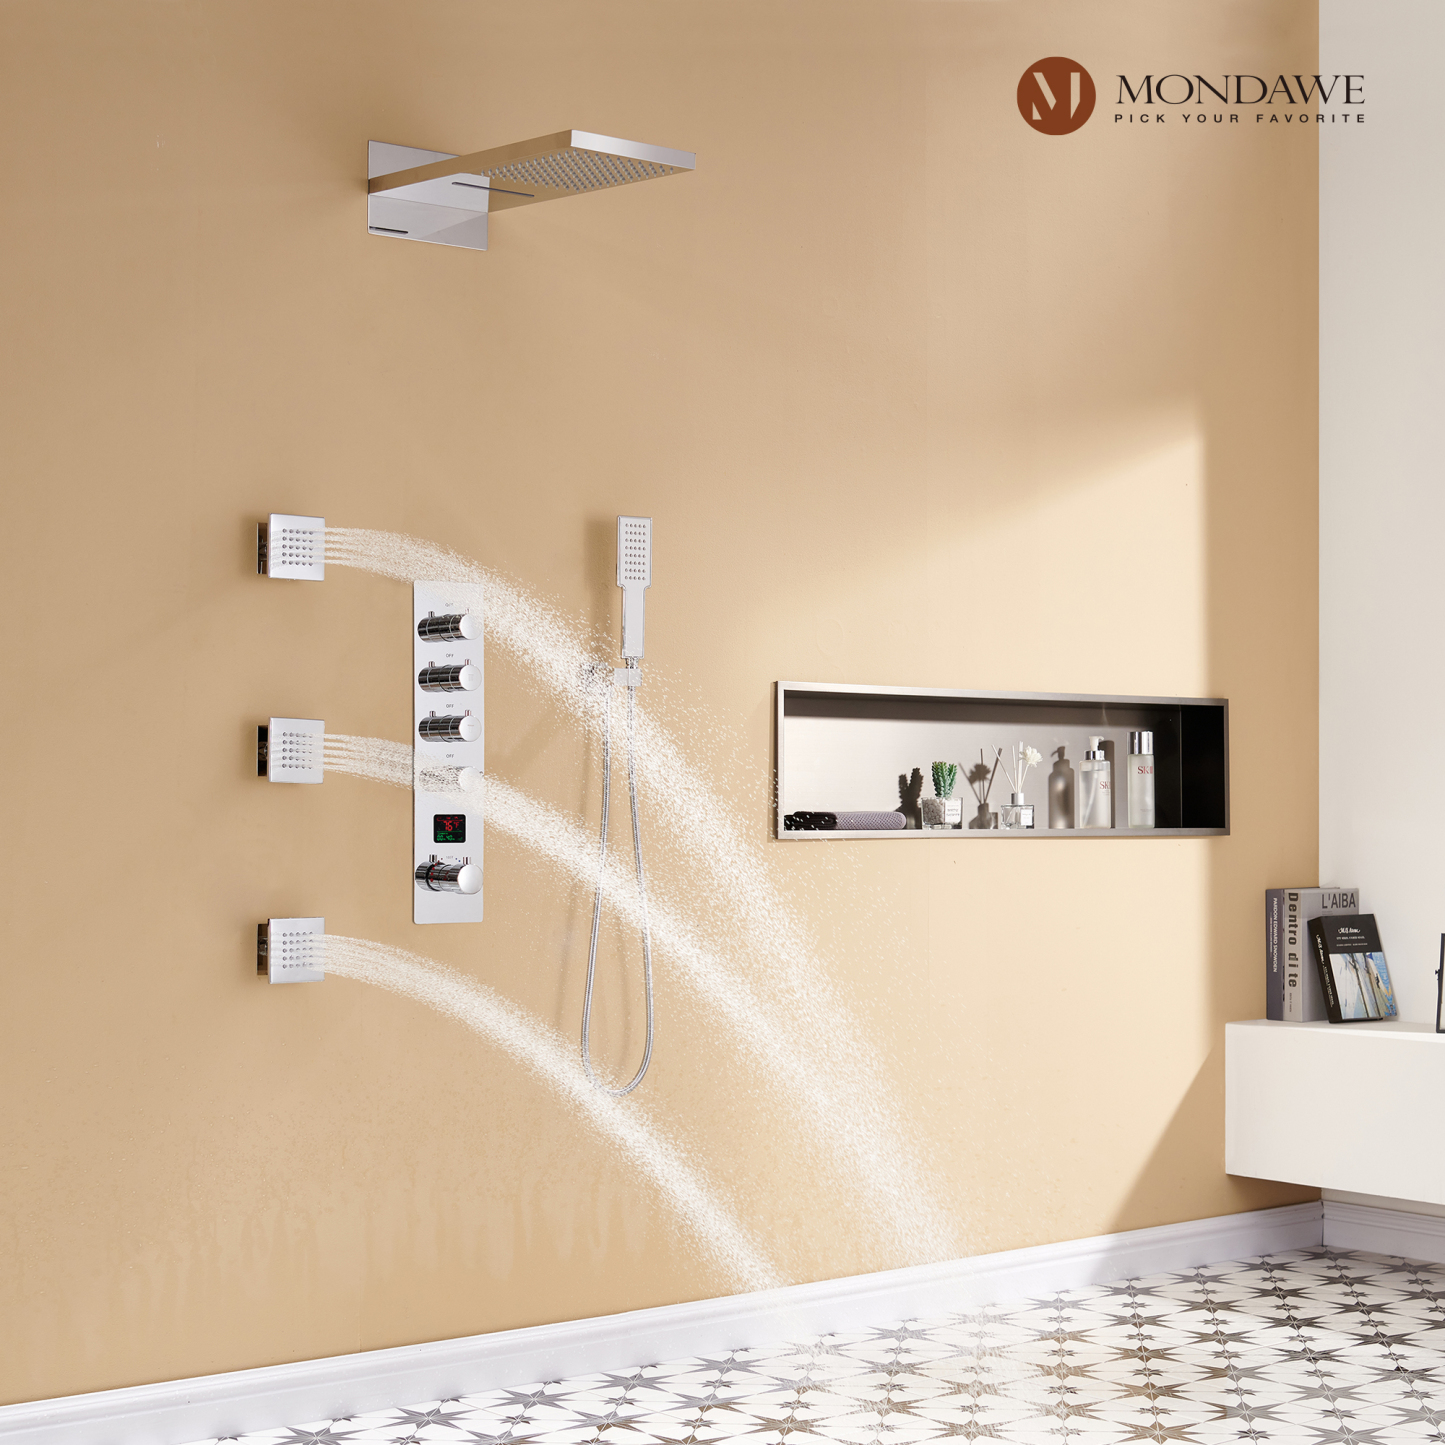 Mondawe Luxury Rain Dual Shower Heads Wall Mounted 22 in. with Digital Temperature Display 4 Spray Patterns Thermostatic and 3 Body Jets-Mondawe